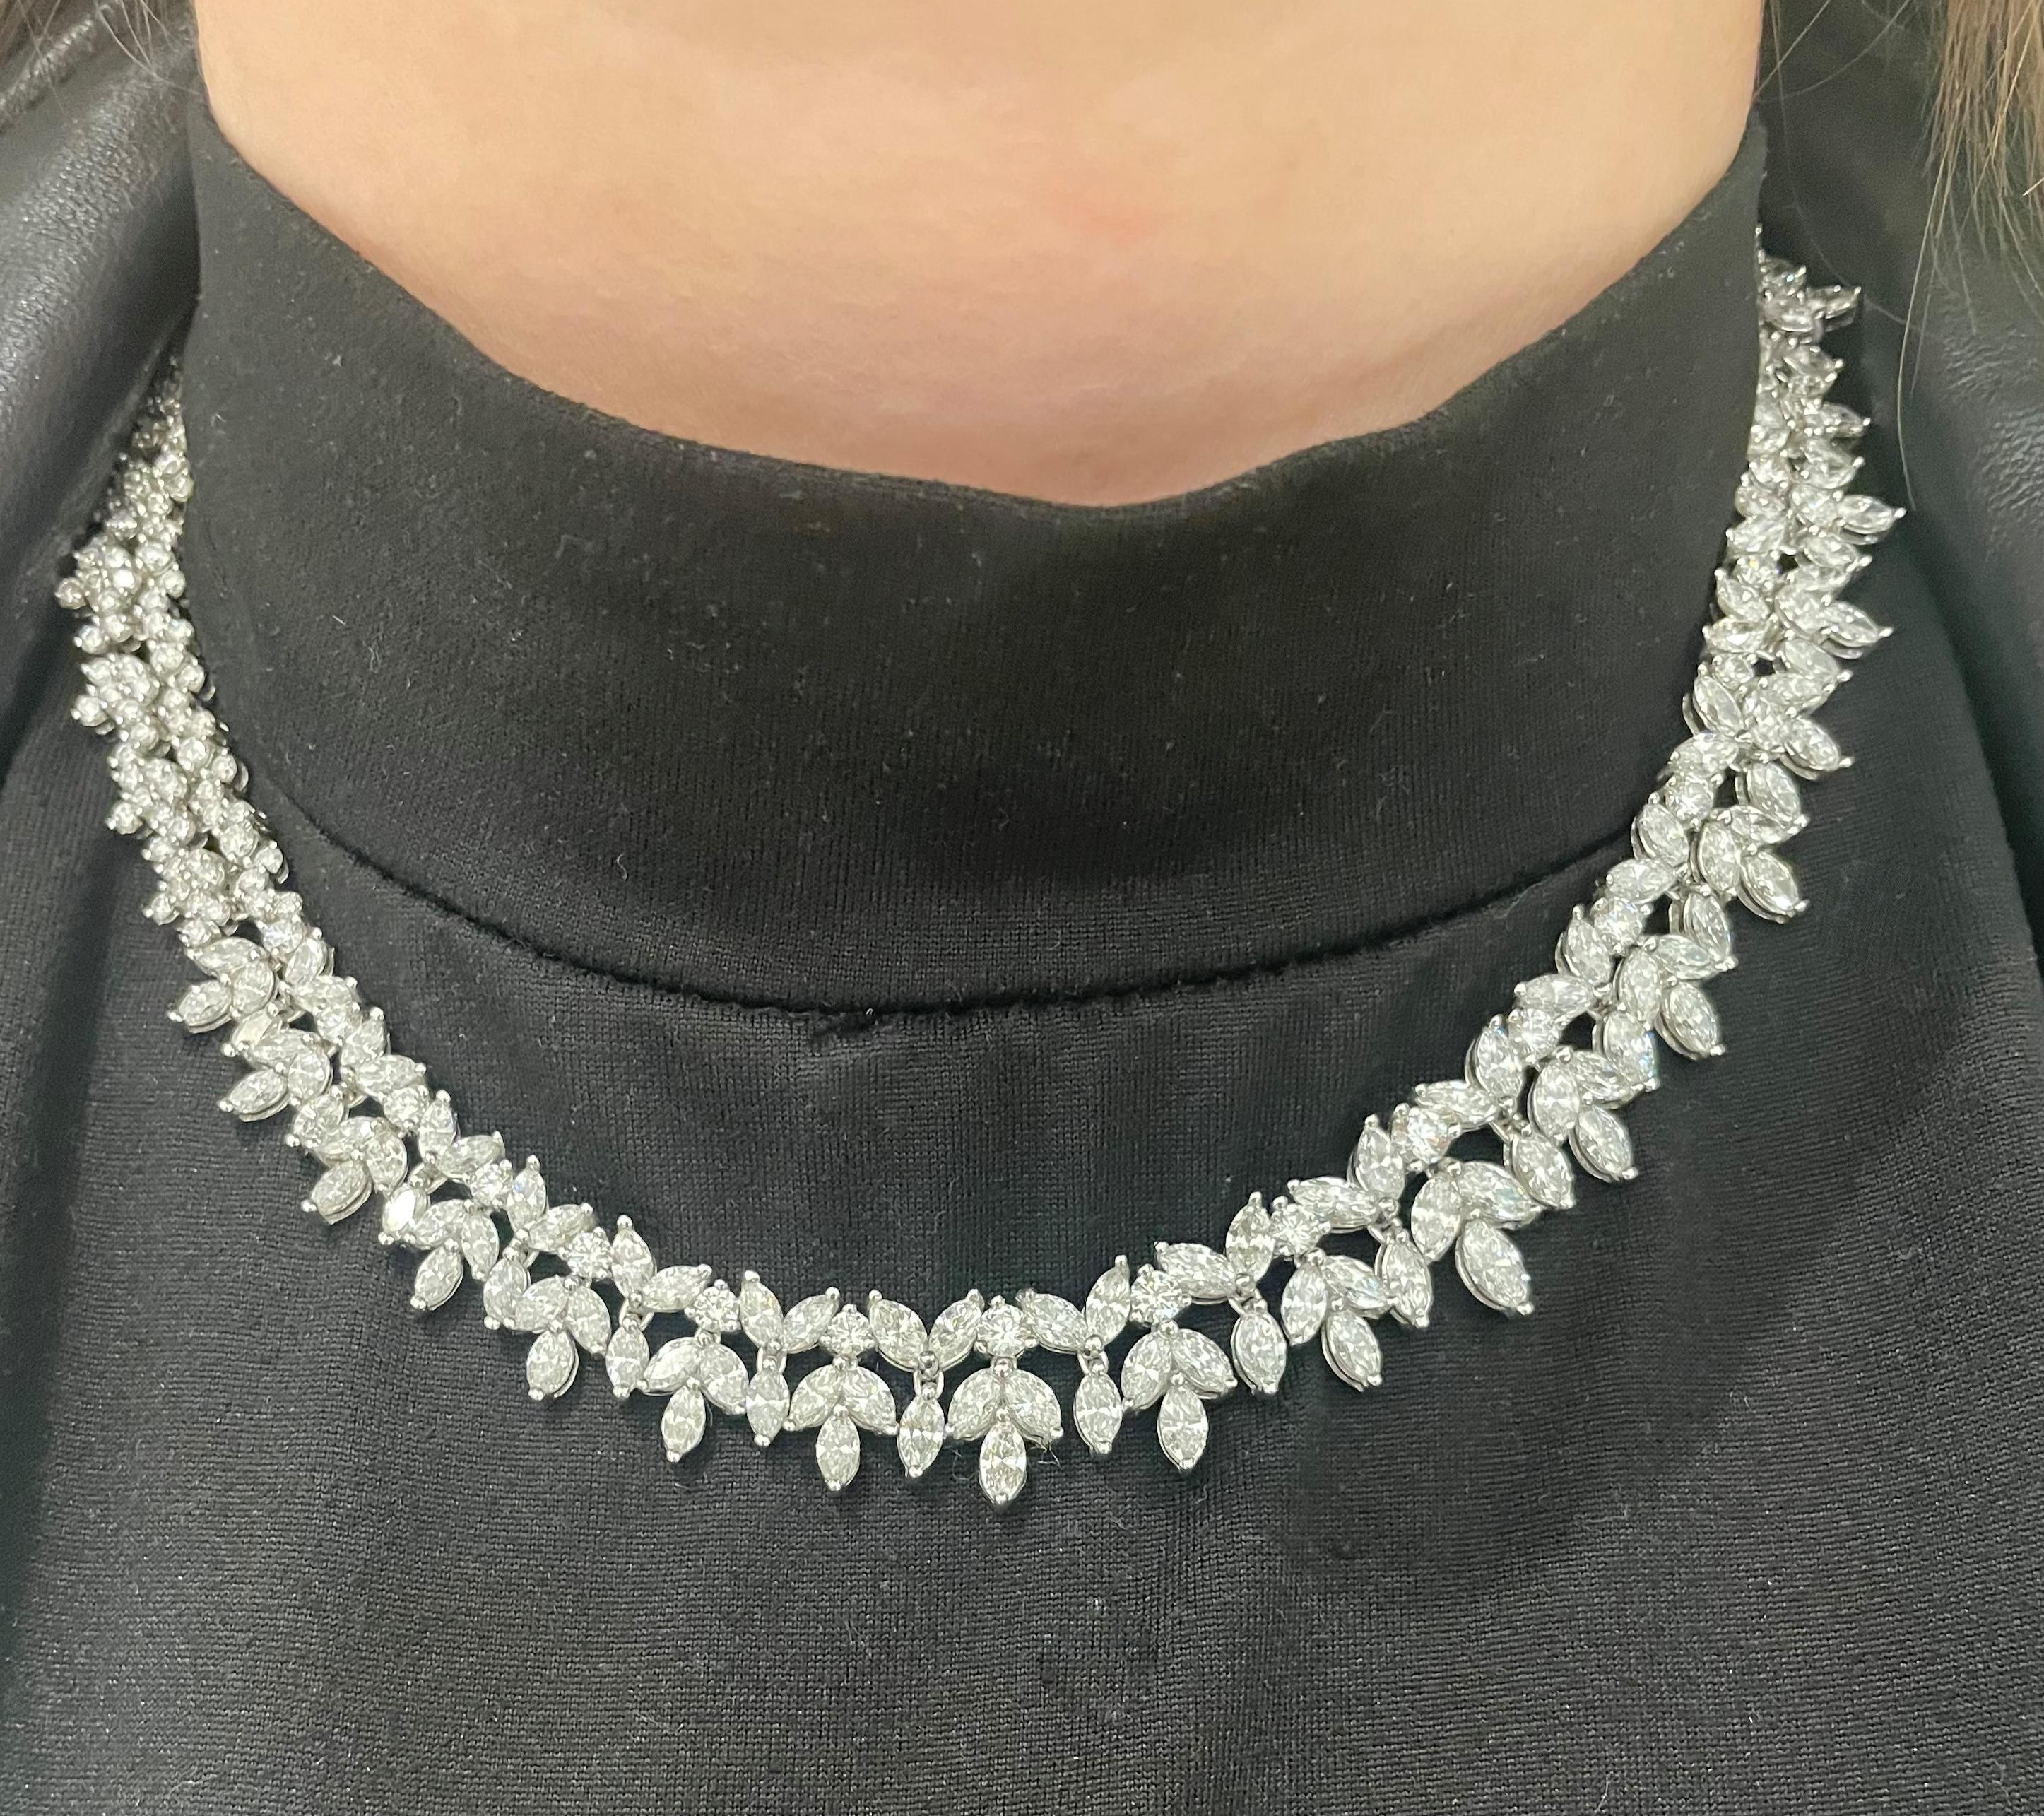 From the Eiseman Estate Jewelry Collection, platinum diamond wreath necklace. This necklace is crafted with 326 round brillaint cut diamonds with a combined weight of 13.14 carats accented by 123 marquise diamonds with a combined weight of 19.92